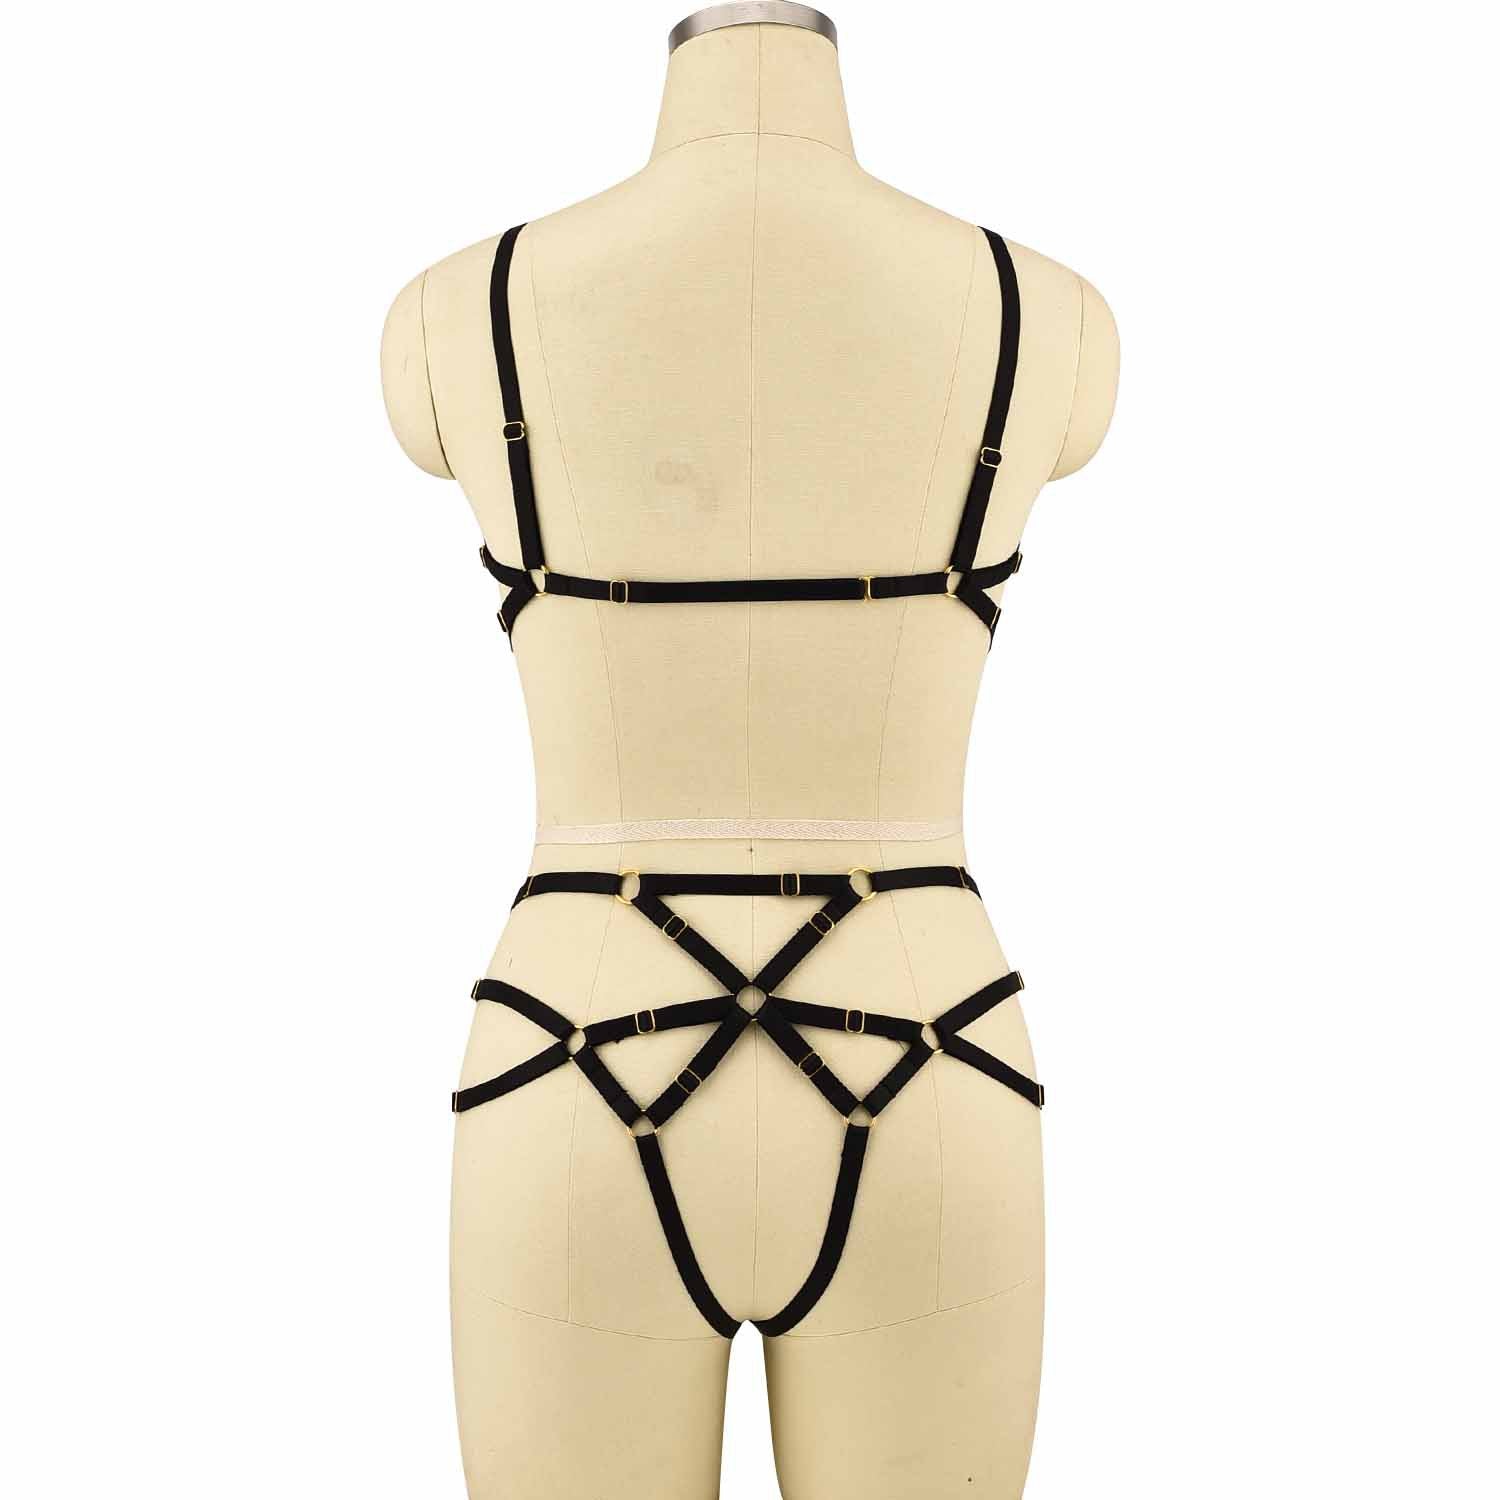 White Red Bodysuit Chubby Bdsm Lingerie Harness Wife Teddy